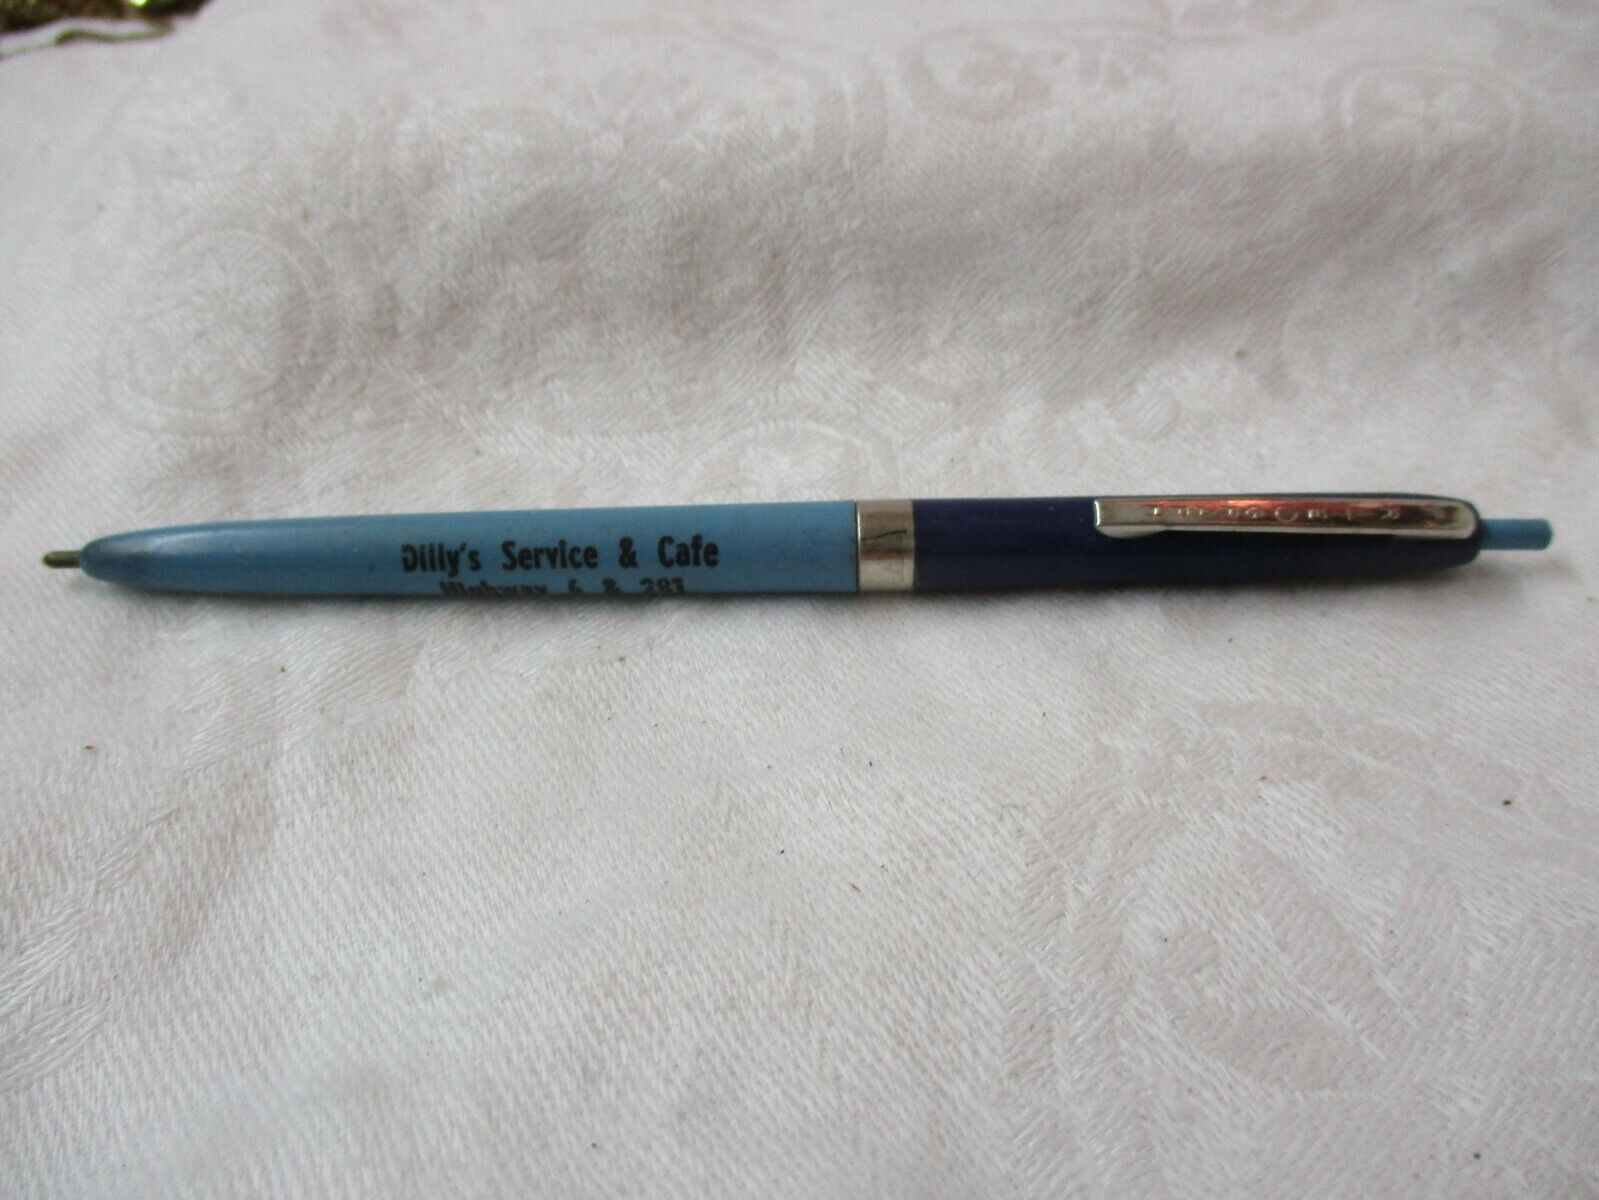 Vintage RiteOGraph Ballpoint Pen 2 tone blue Advertising Dilly\'s Service Cafe NE